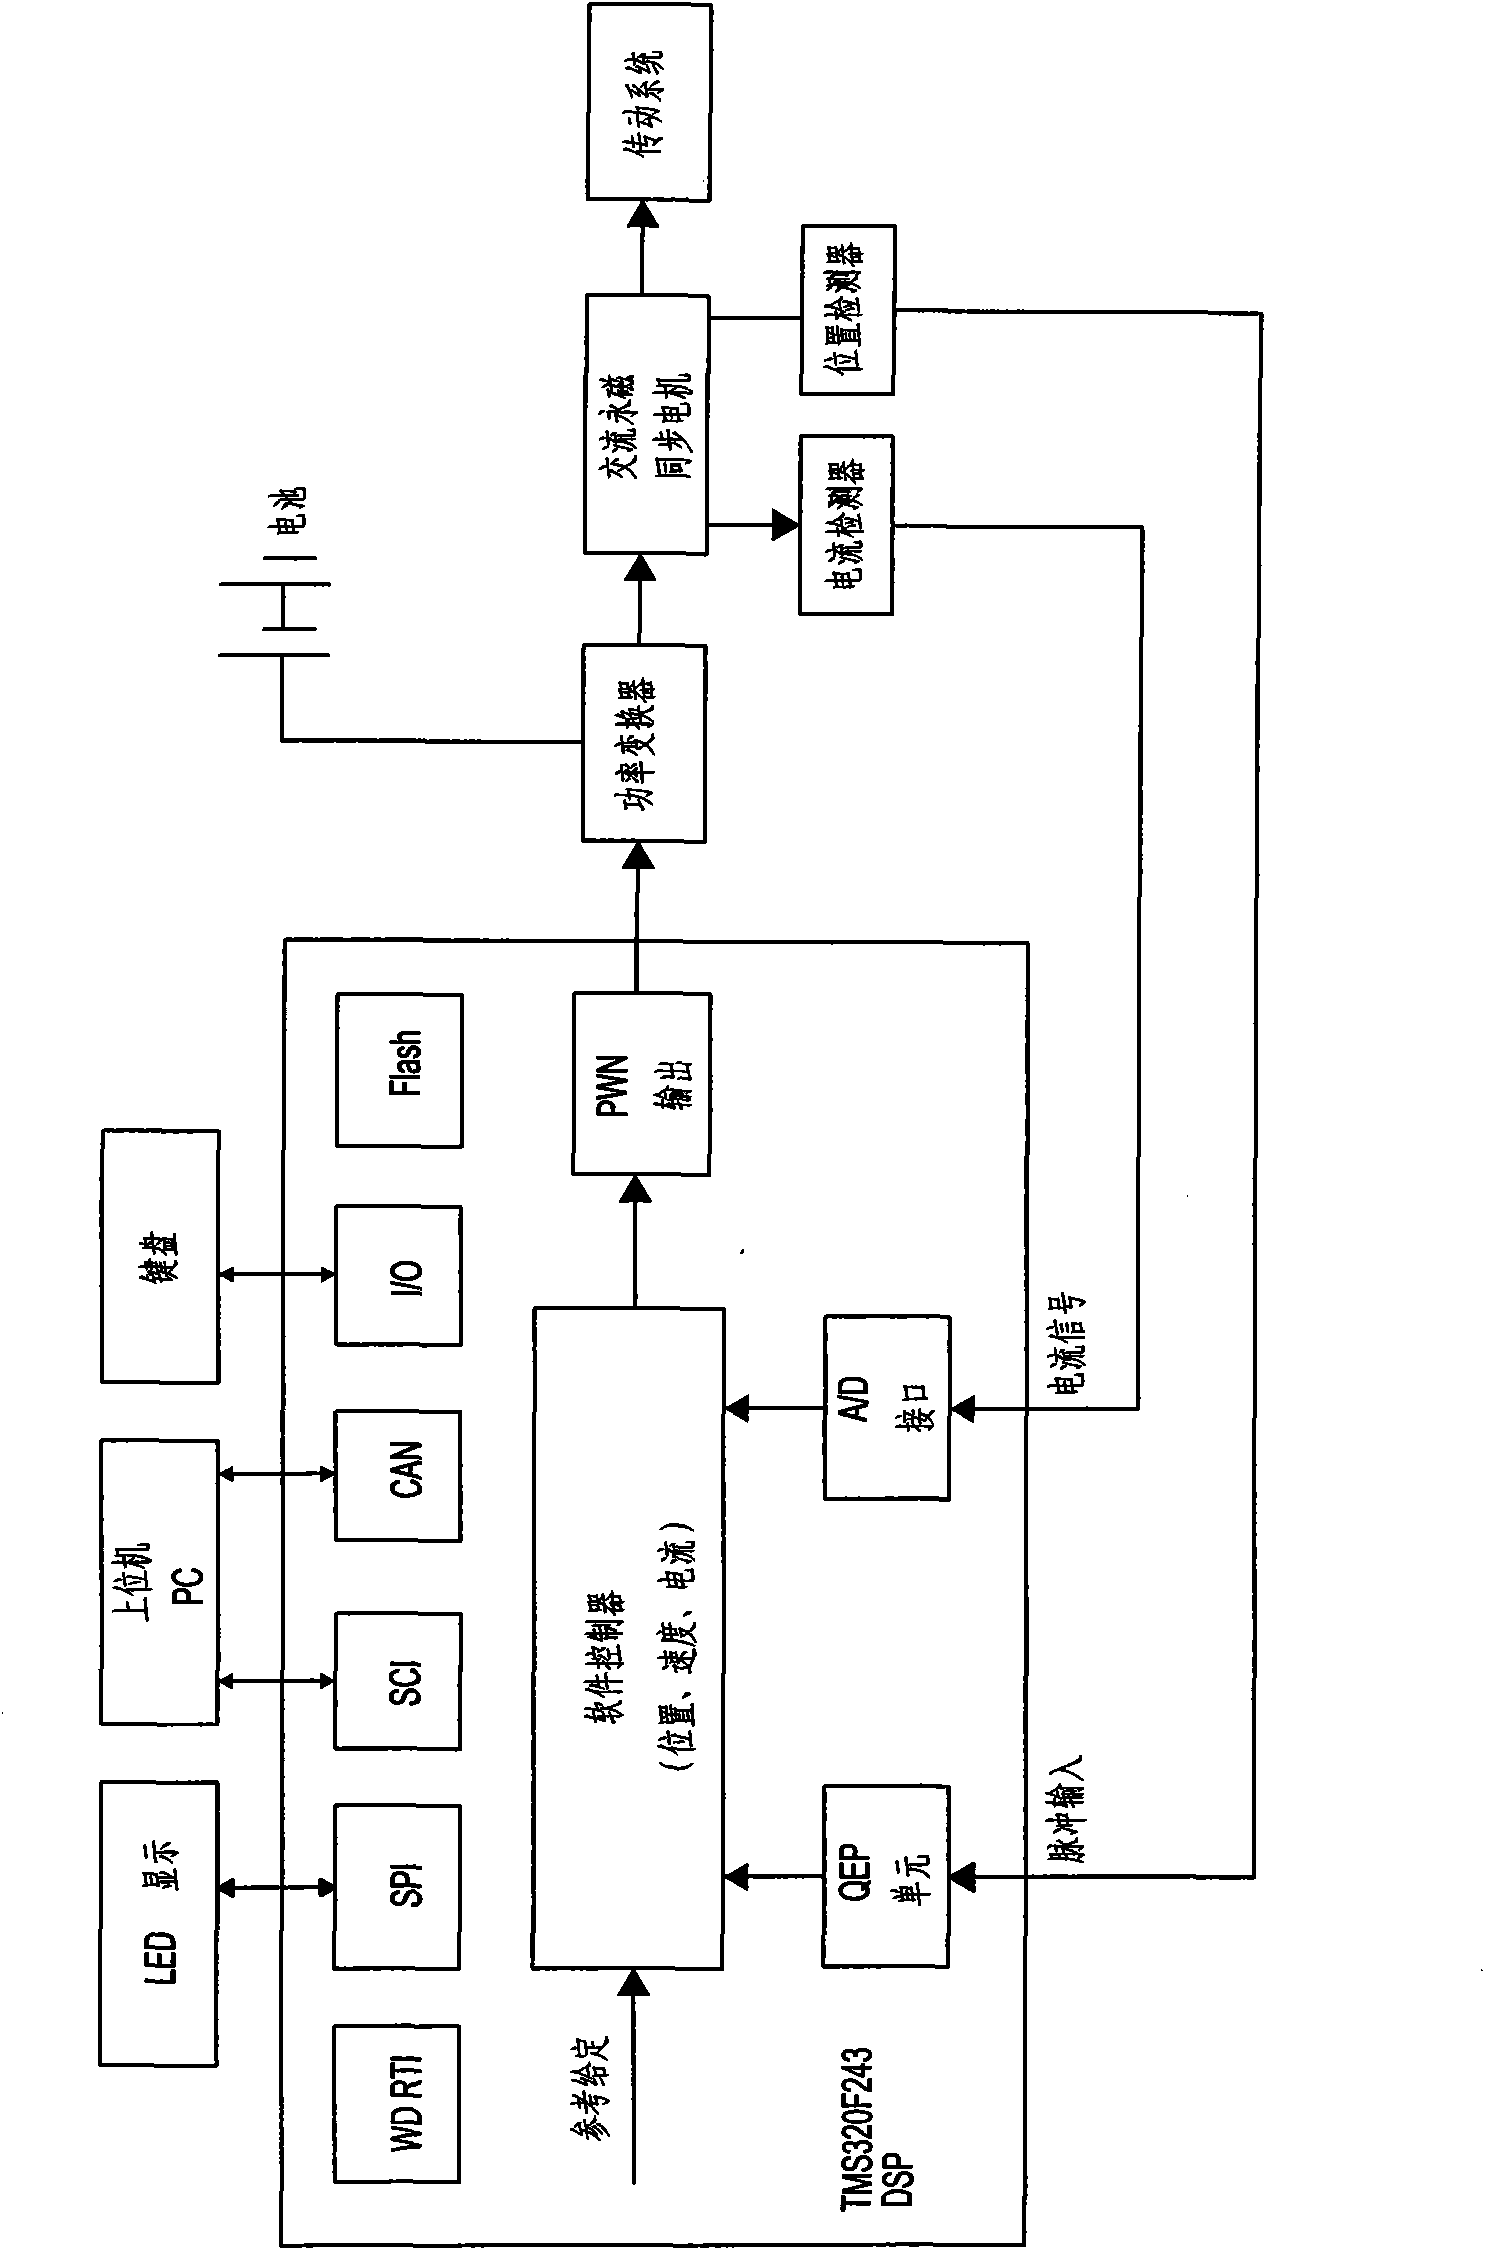 Alternating current permanent magnet synchronous machine control system for electric vehicle